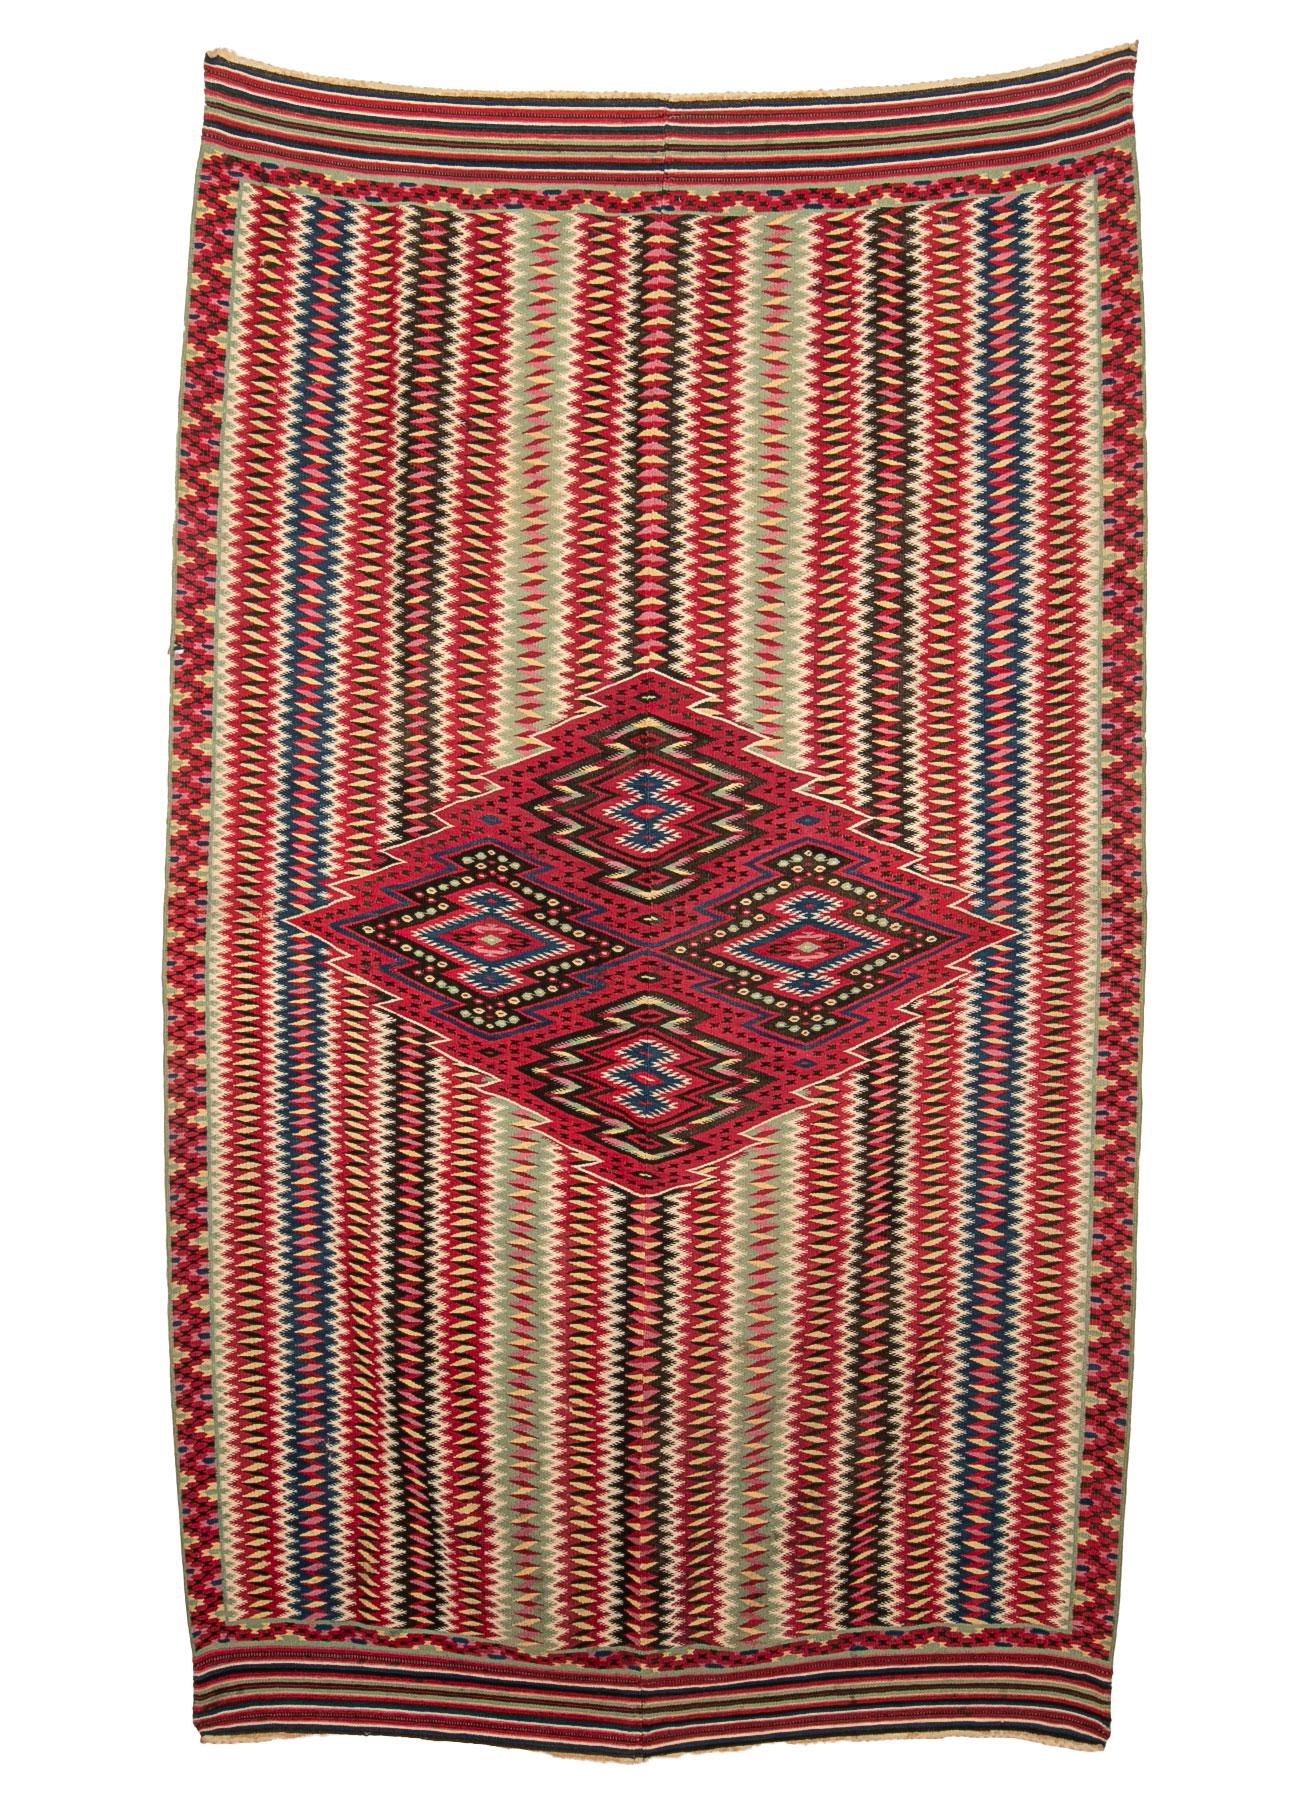 A Saltillo serape is a type of Mexican blanket that originated in Saltillo, a city in the northern state of Coahuila. It is typically made of wool and features vibrant colors and intricate designs, often incorporating geometric shapes and floral